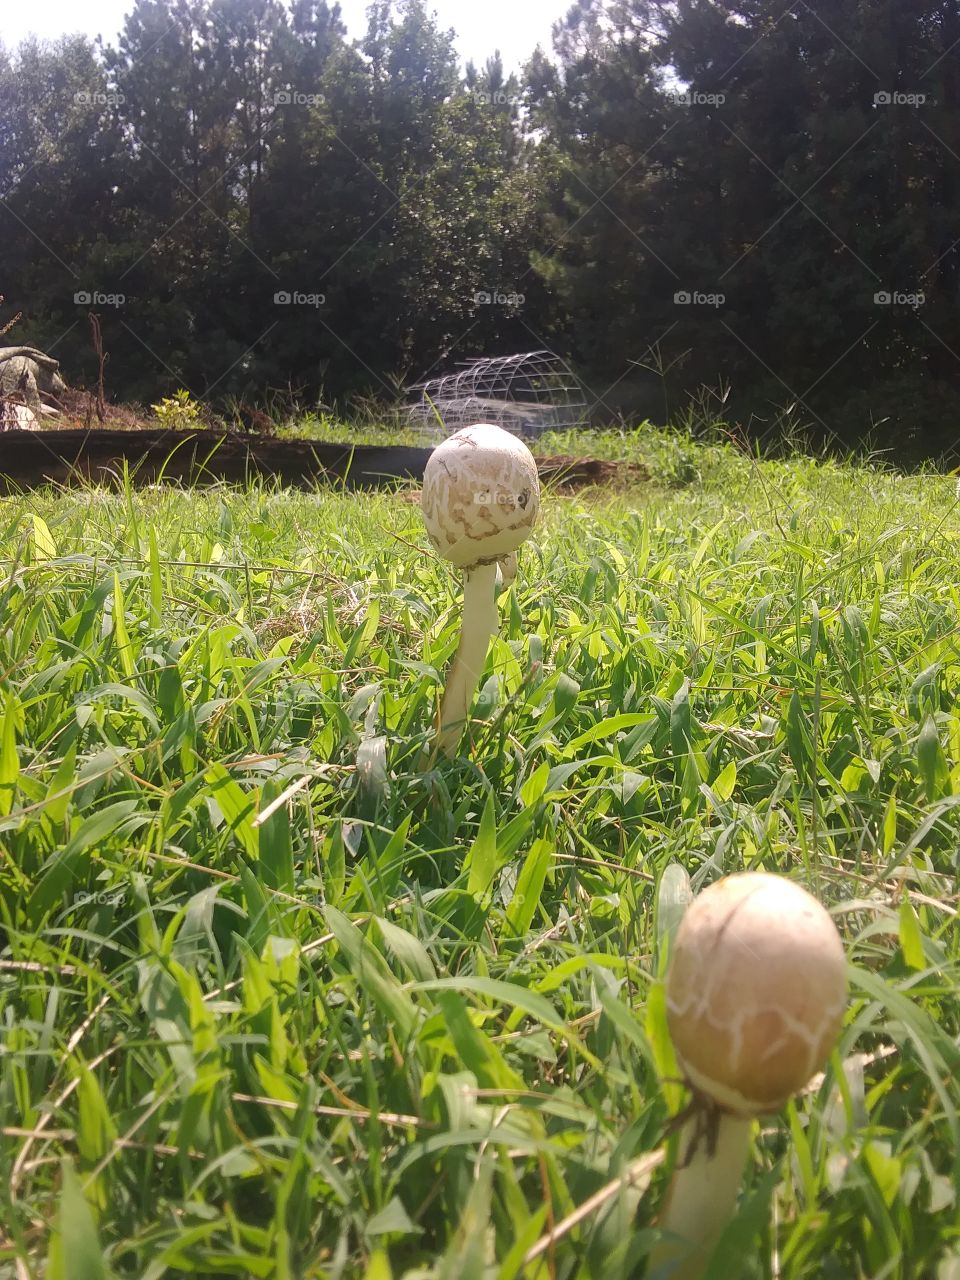 egg looking shrooms